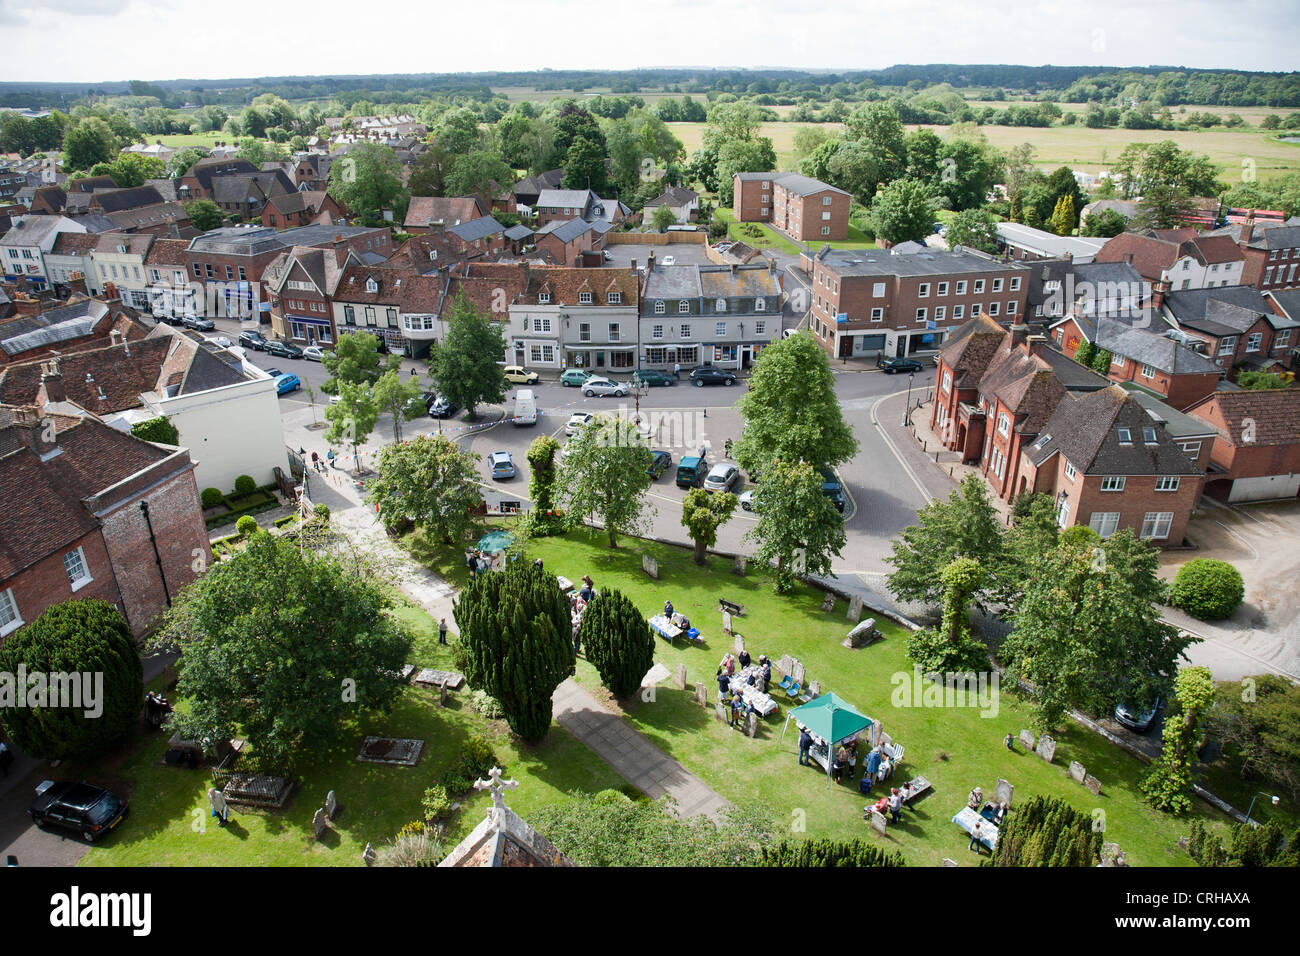 Ariel view of Ringwood taken from the church tower Stock Photo